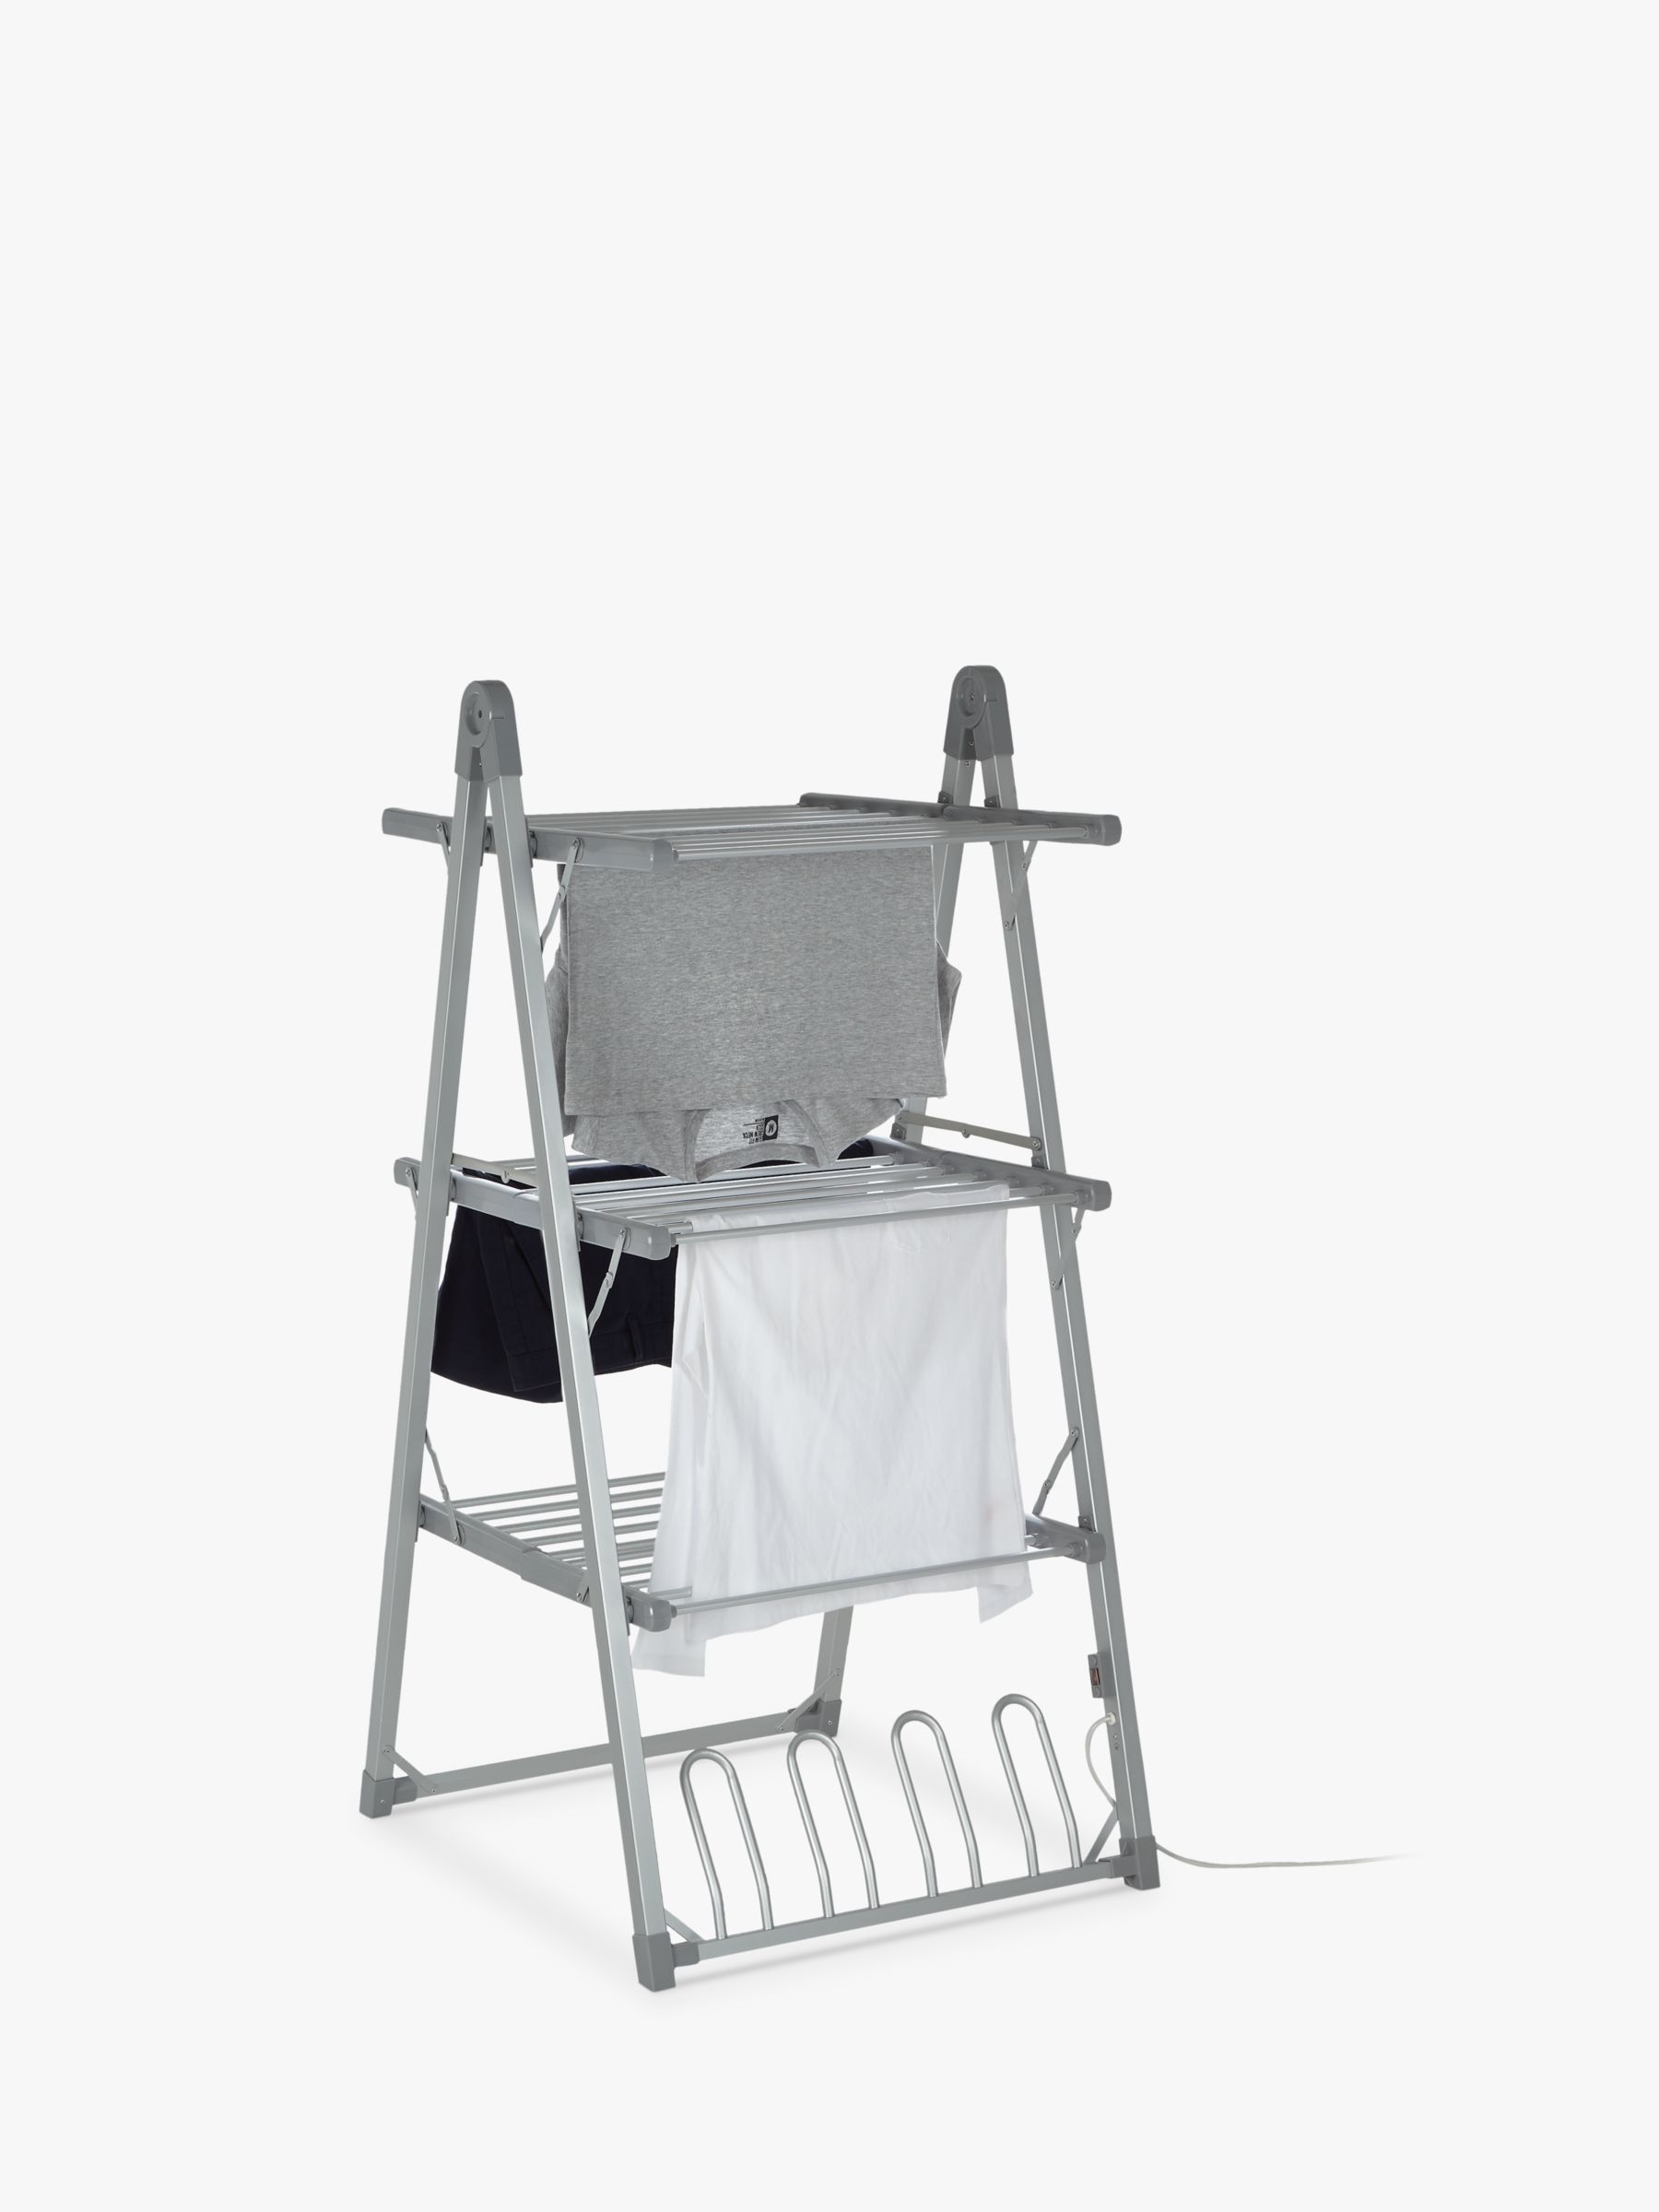 Glamhaus Digital Electric Clothes Airer Heated Drying Rack 4tier